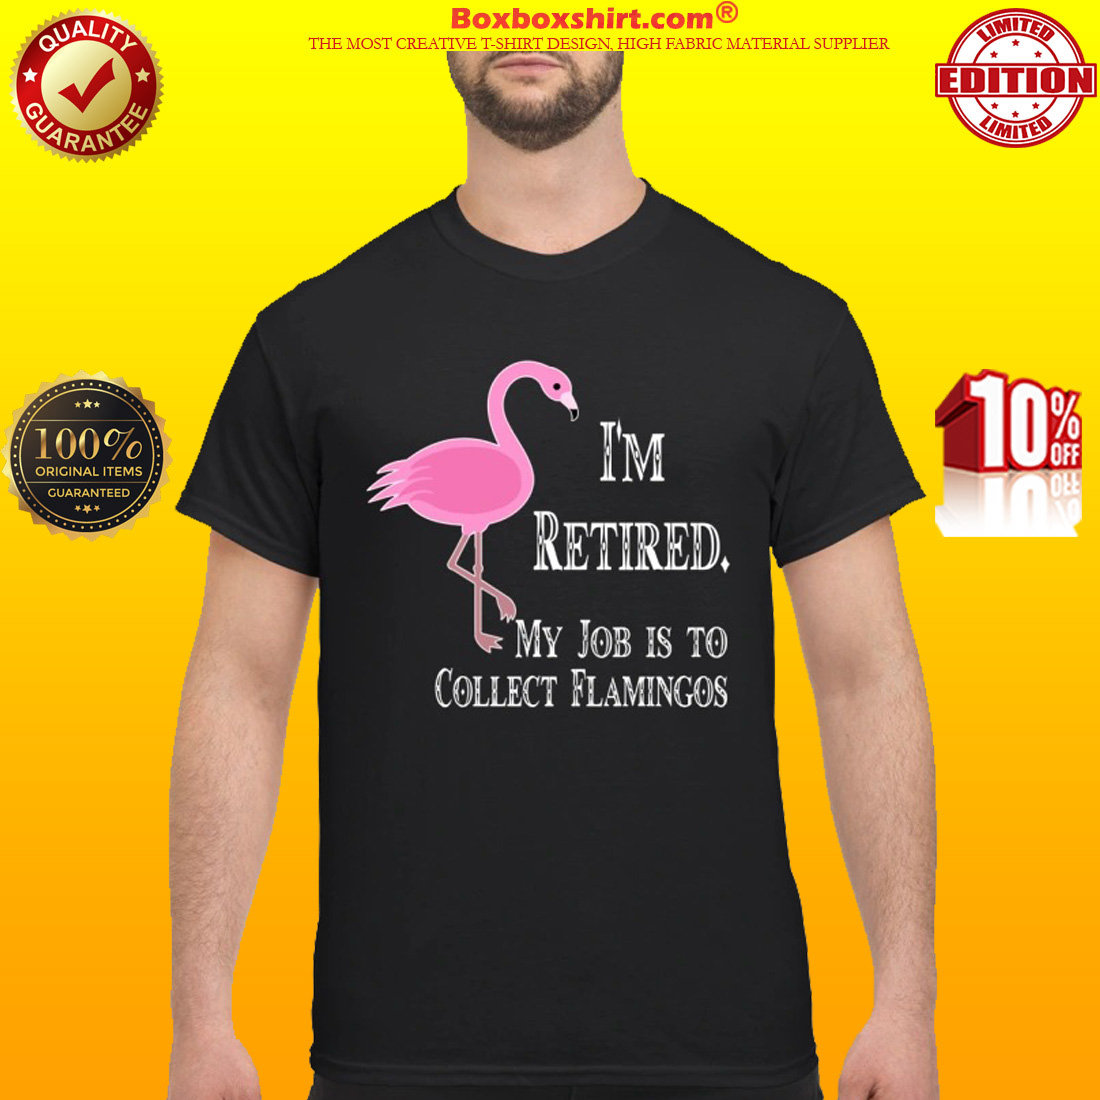 I'm retired my job is to collect flamingos classic shirt